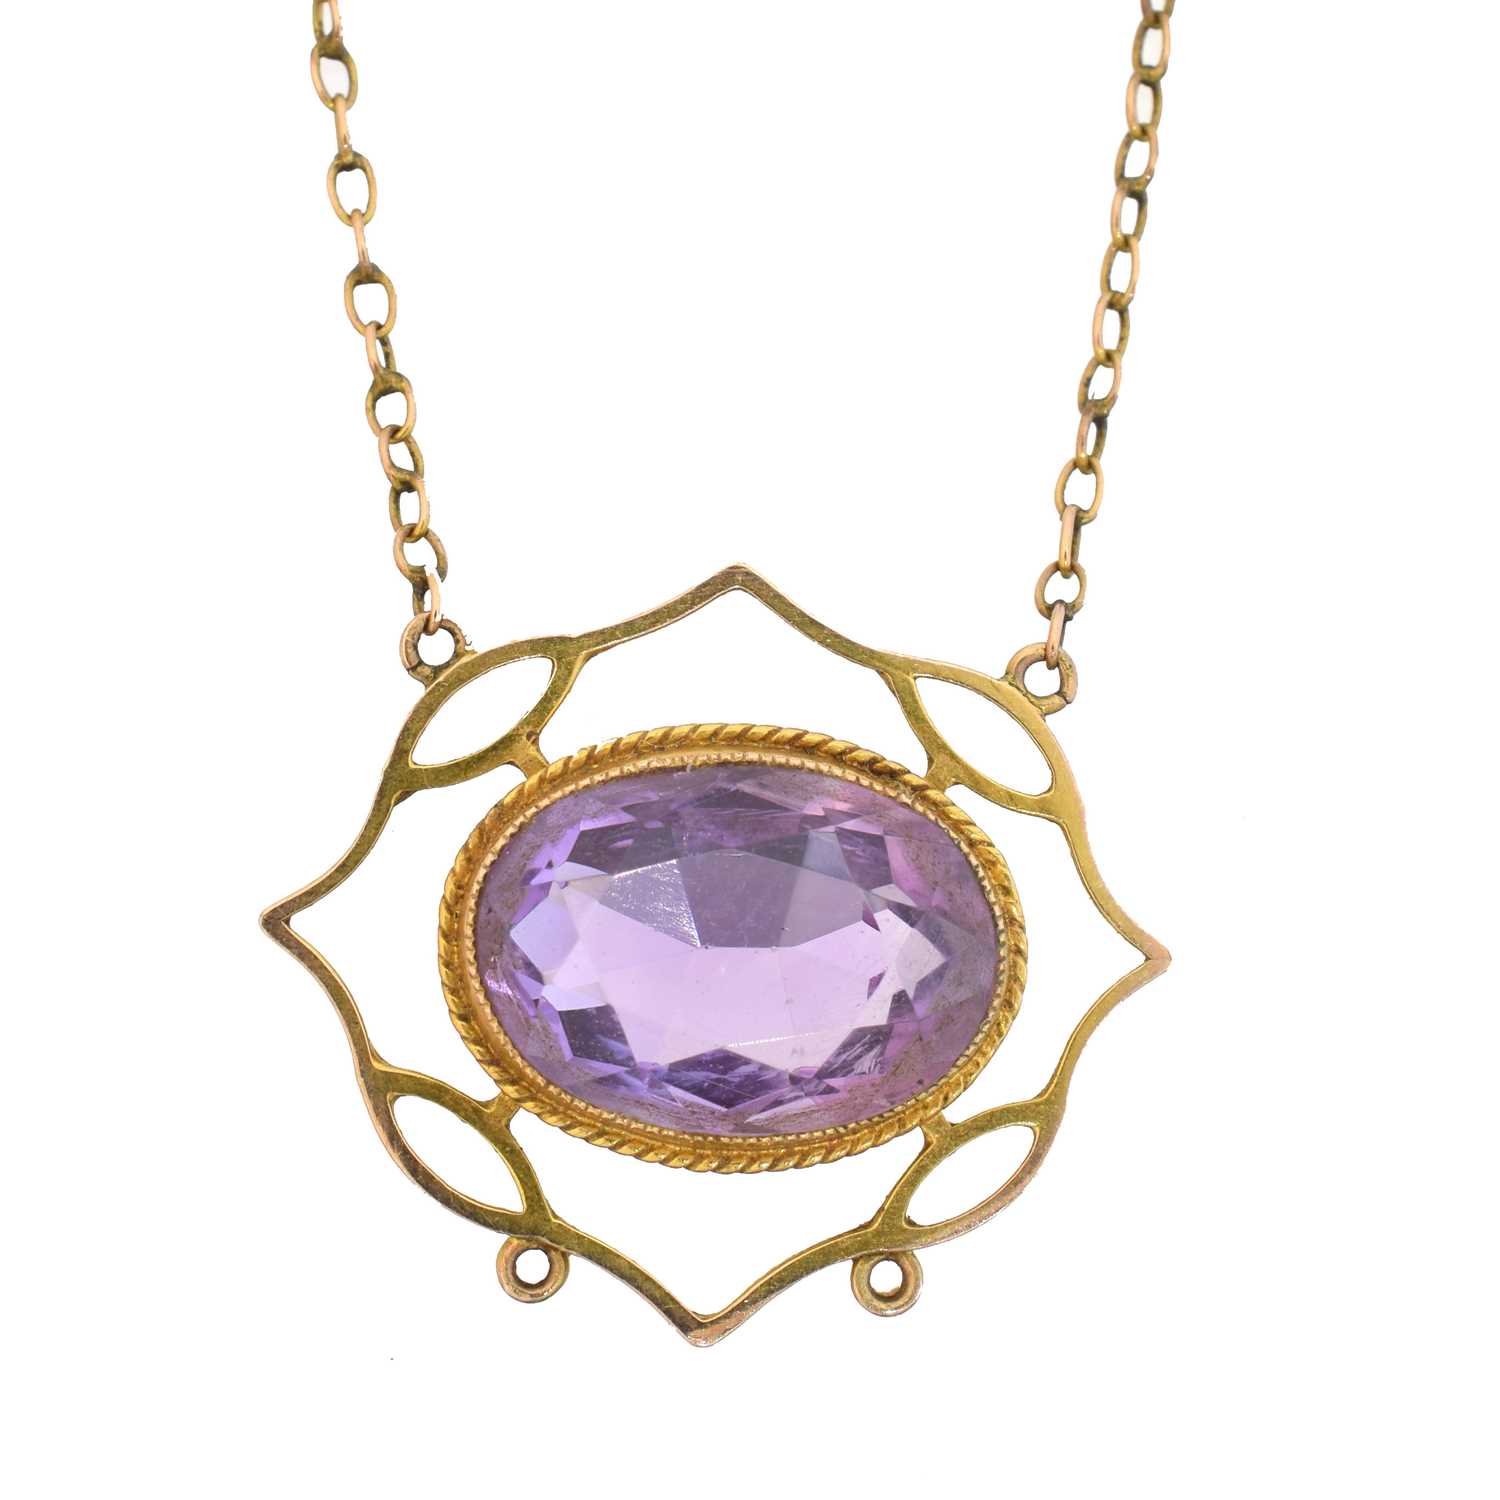 Lot 29 - An early 20th century amethyst pendant